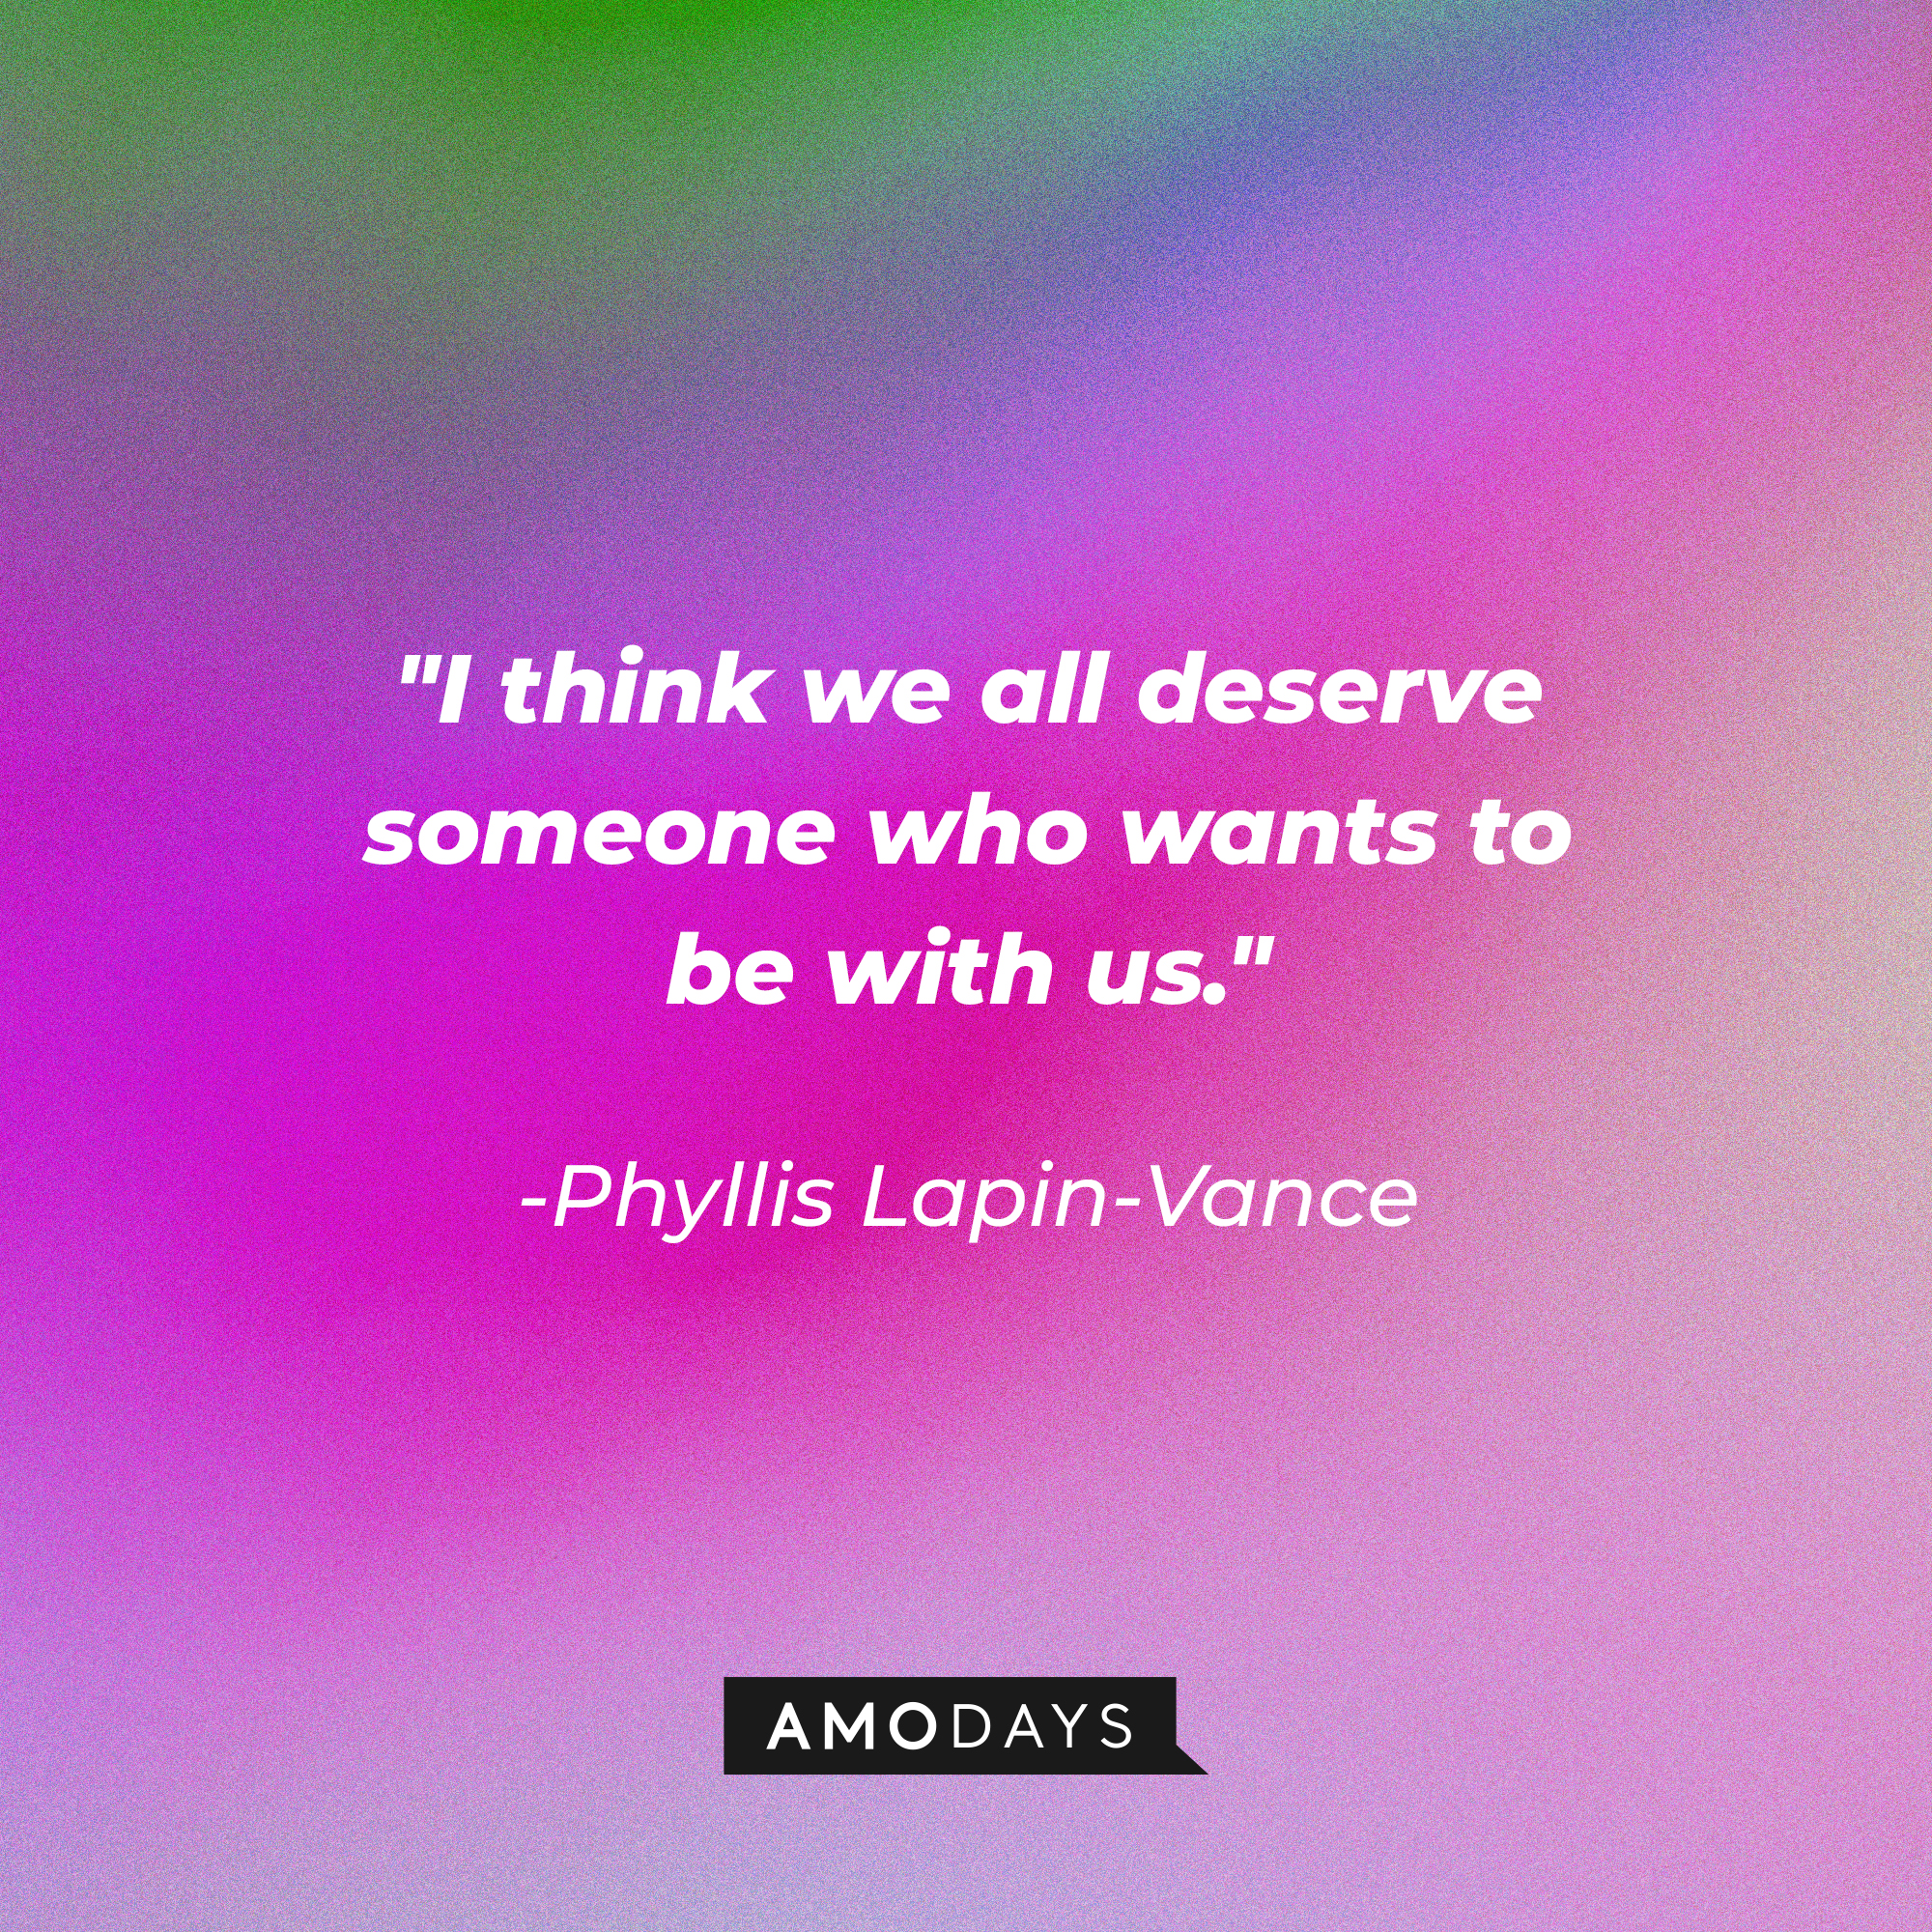 Phyllis Lapin-Vance’s quote: "I think we all deserve someone who wants to be with us." | Image: AmoDays